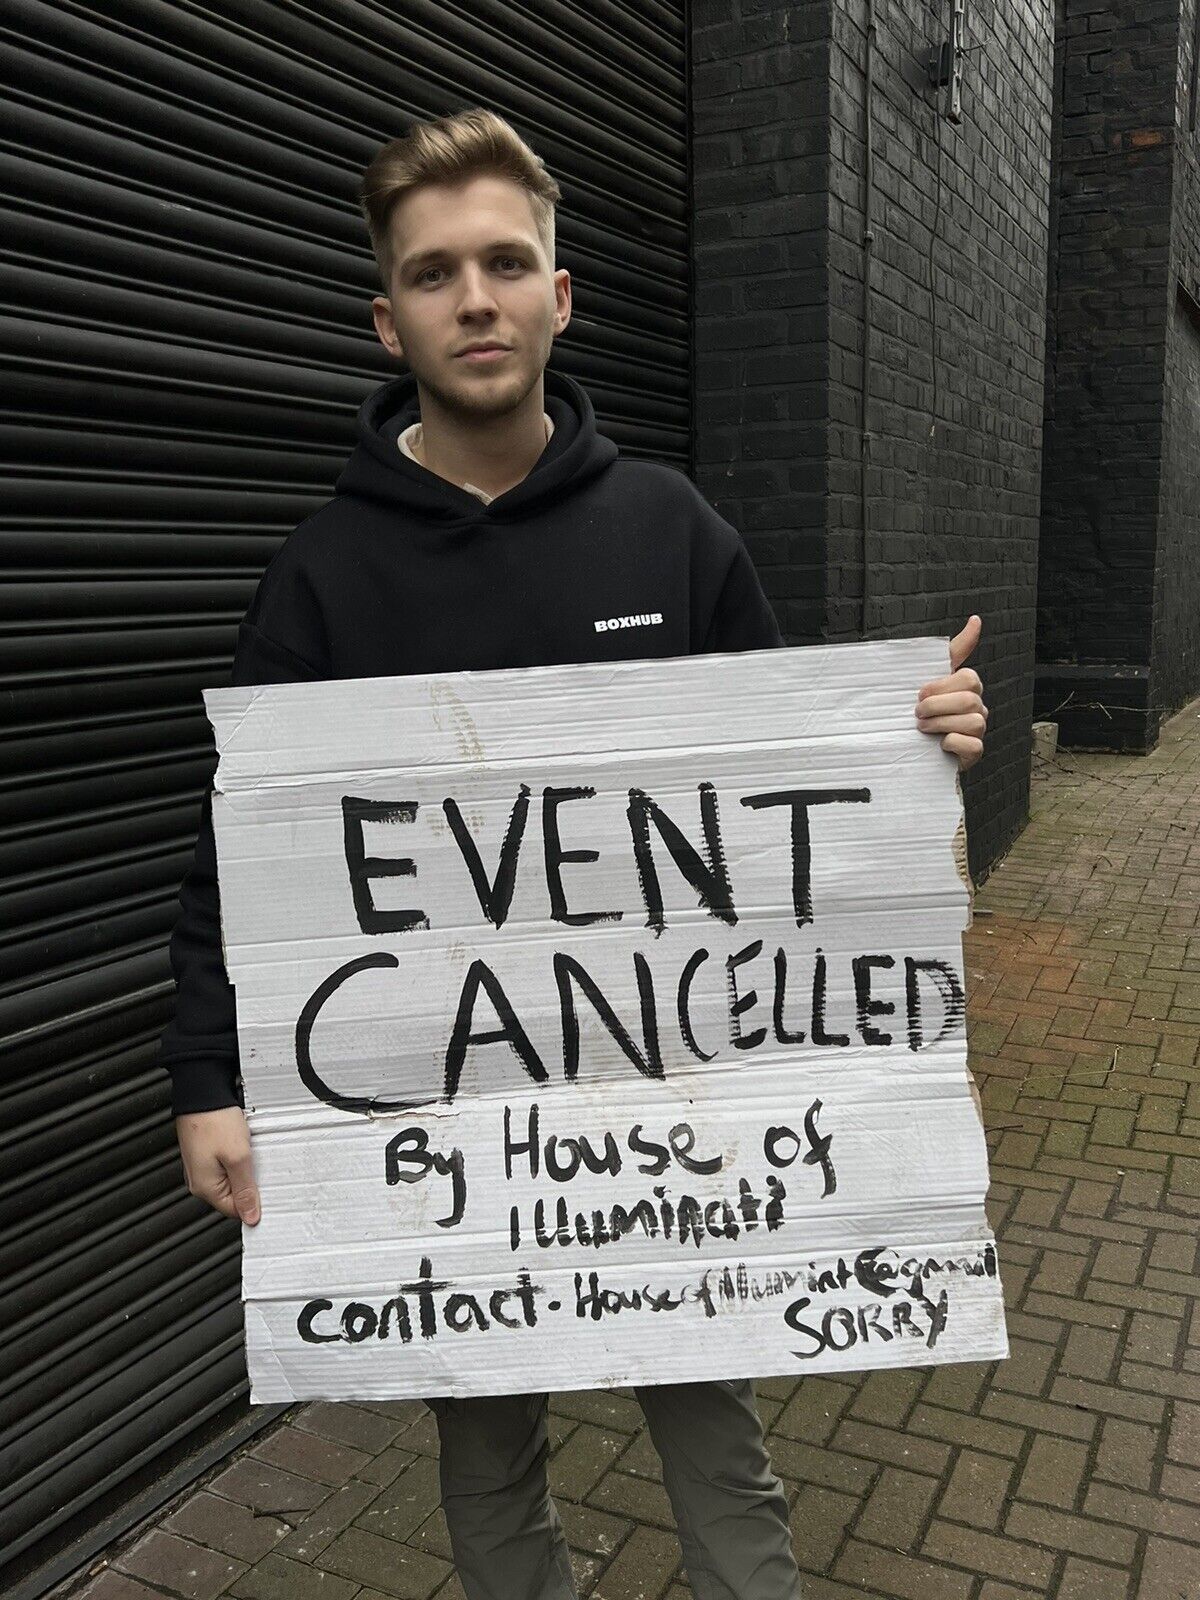 The 'event cancelled' sign from the Willy Wonka experience in Glasgow has raised over £1000. Photo: Box Hub/Ebay